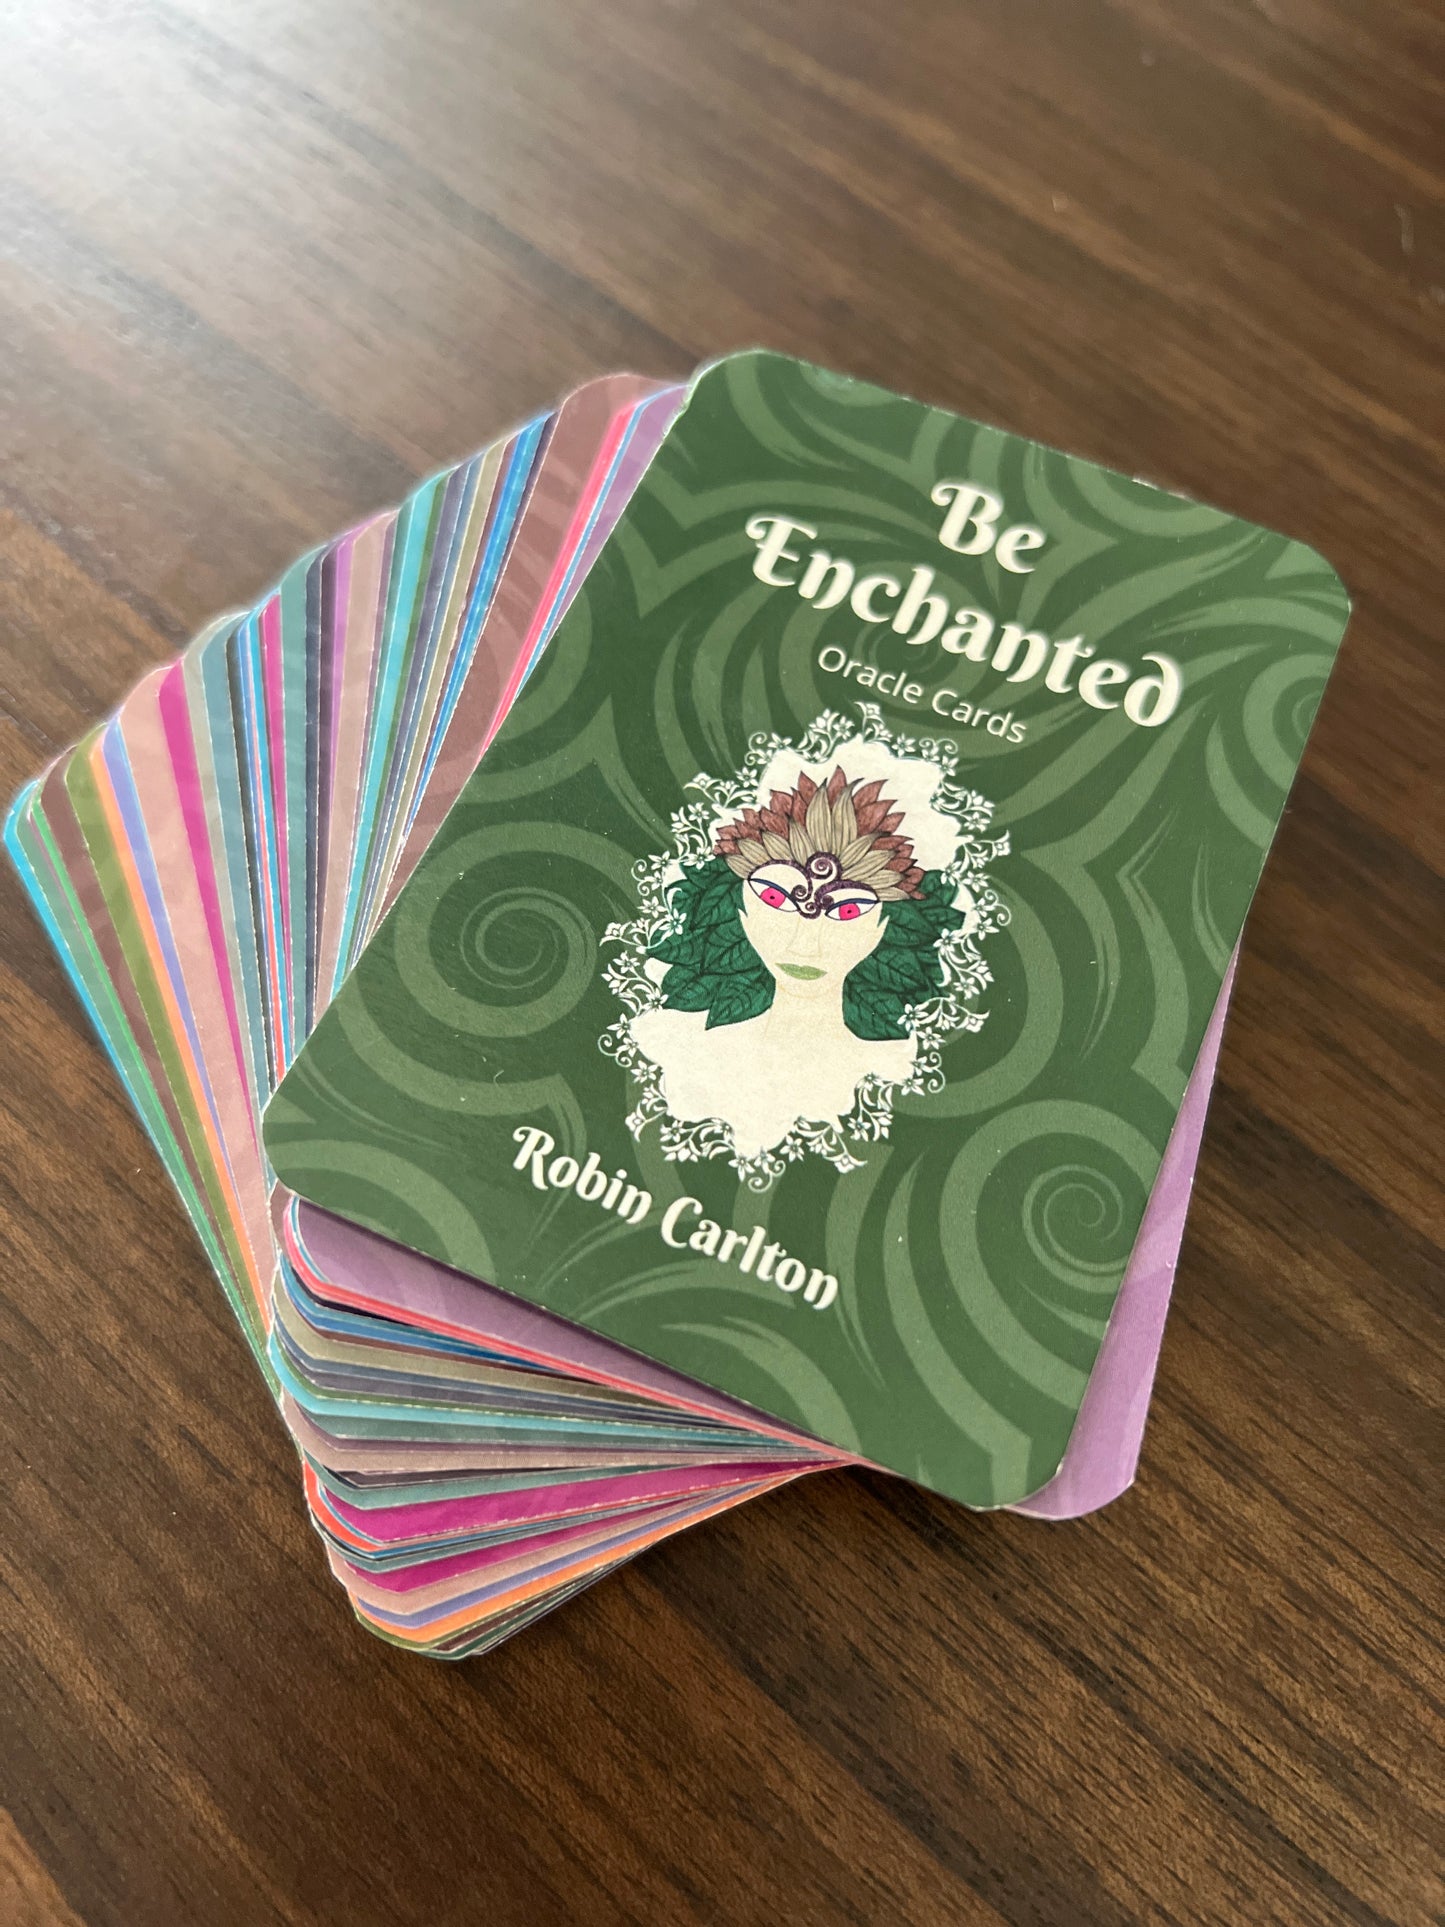 Be Enchanted Oracle Card Deck